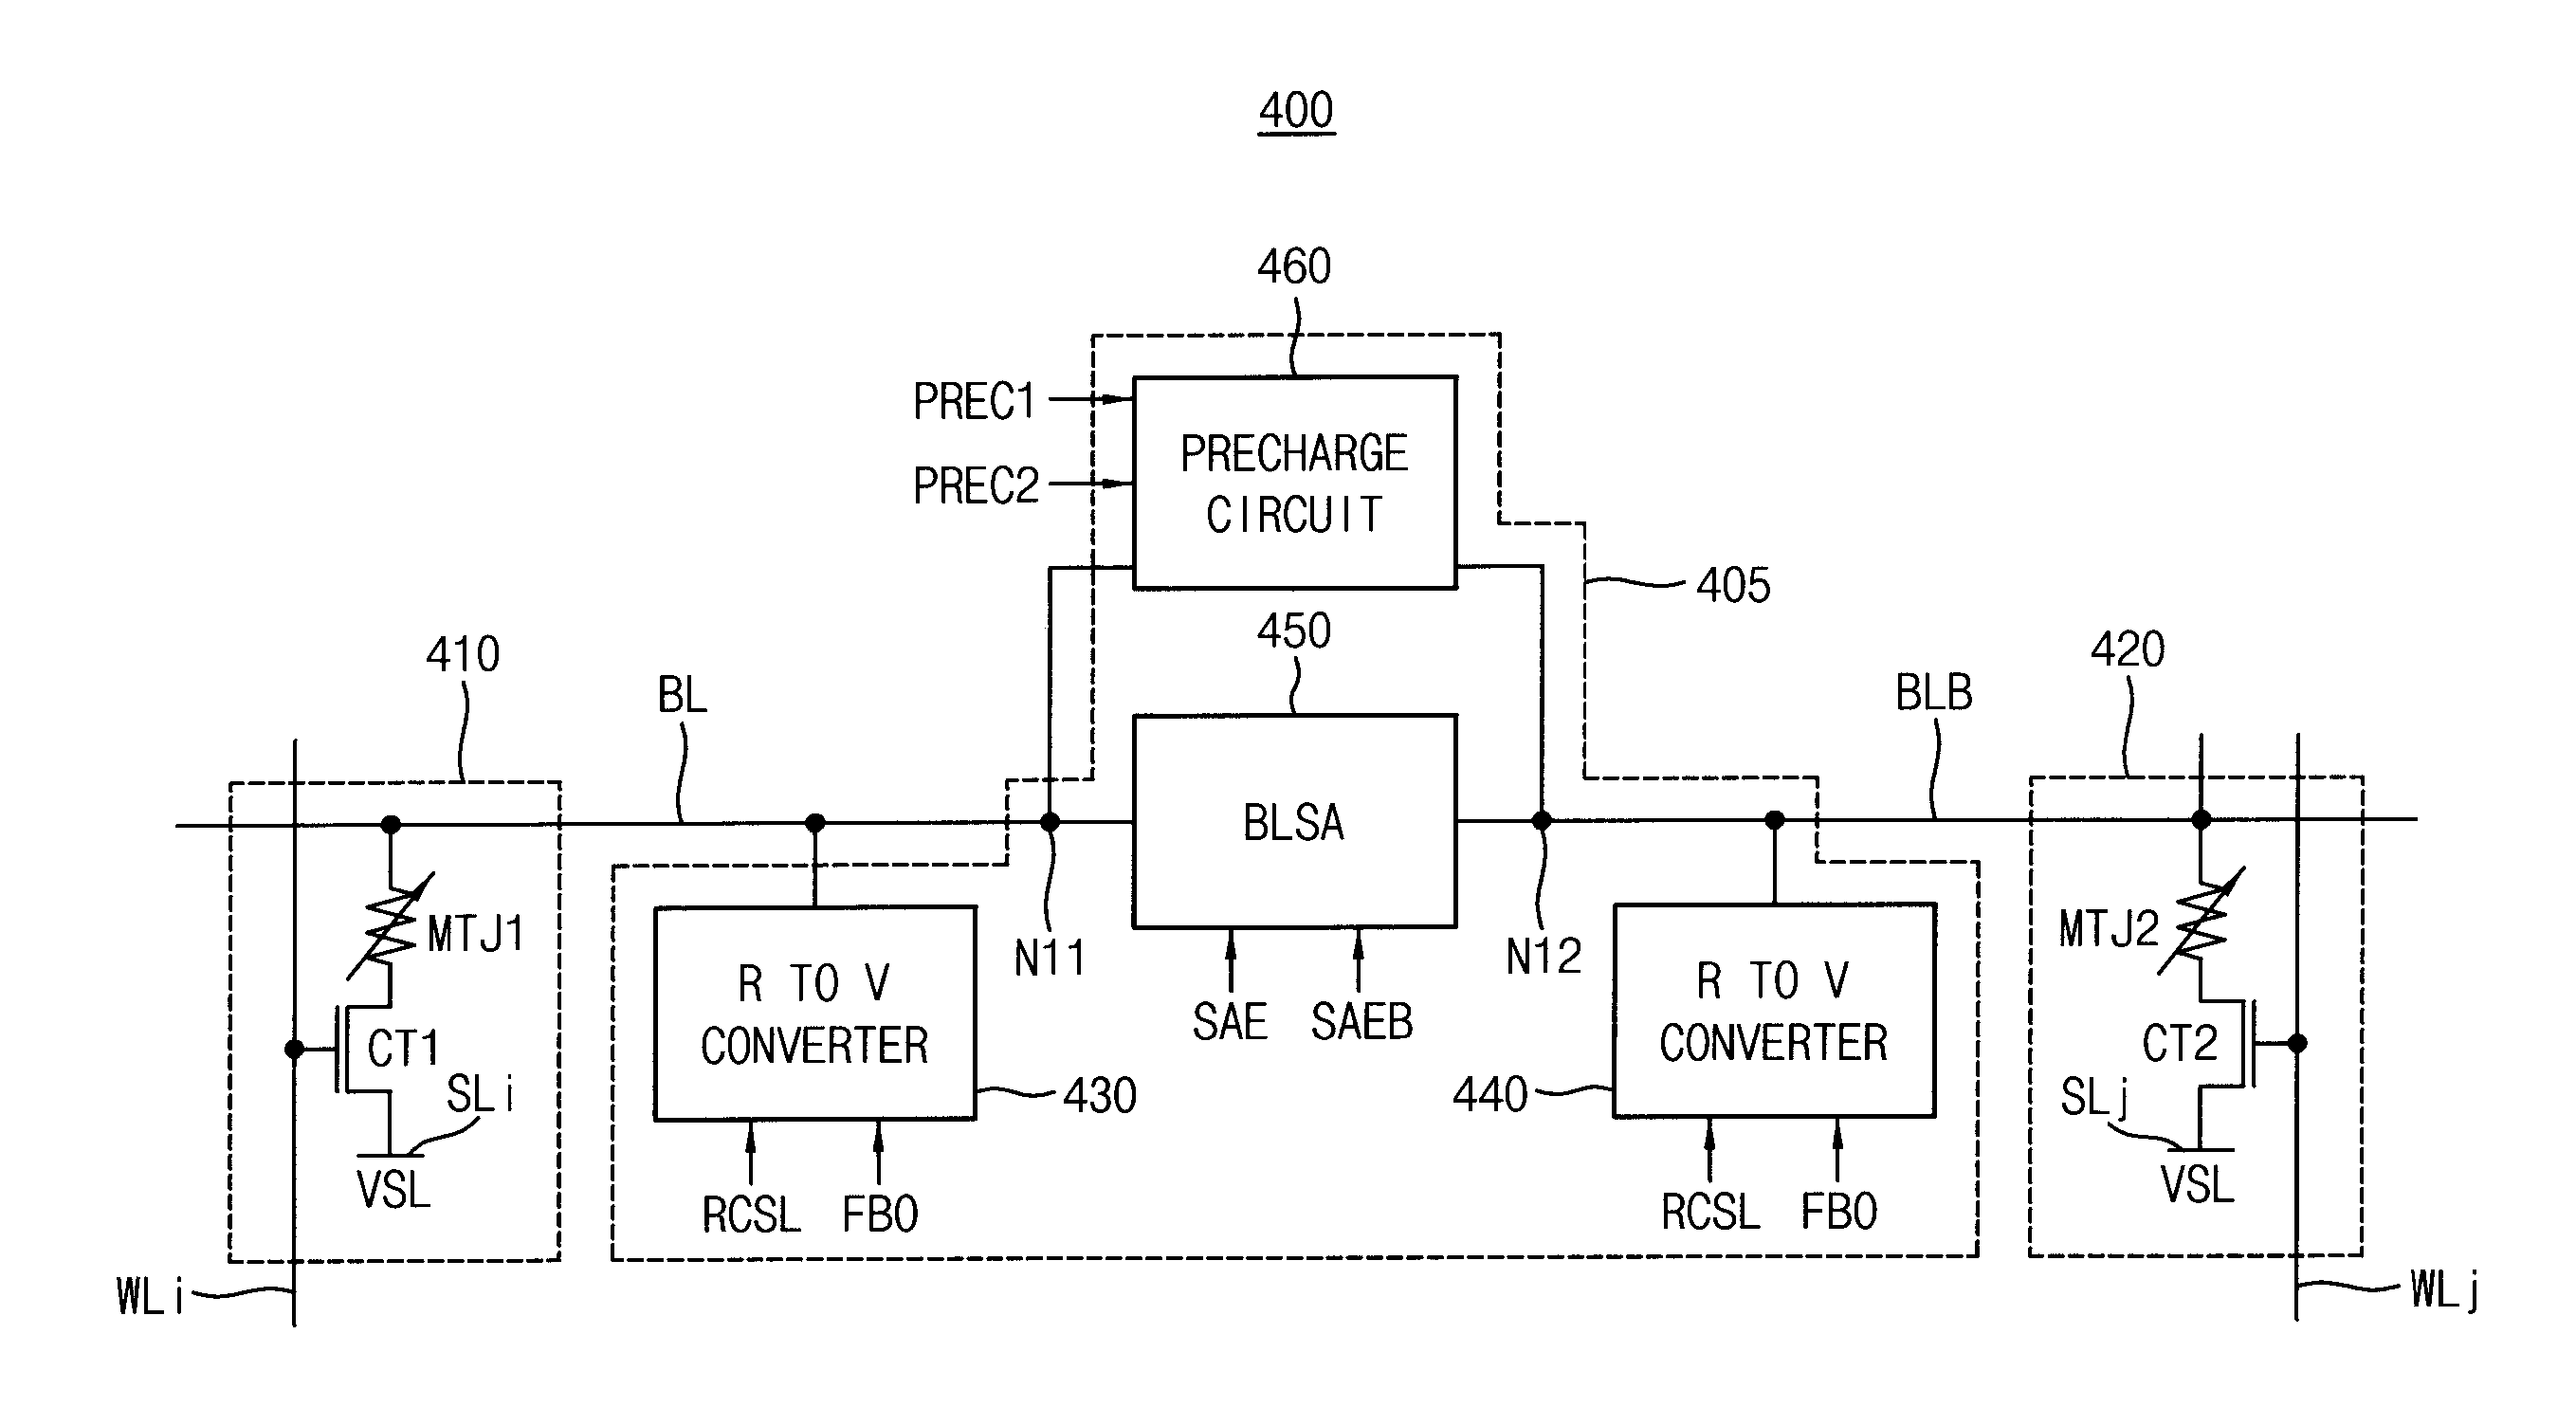 Memory cores of resistive type memory devices, resistive type memory devices and method of sensing data in the same